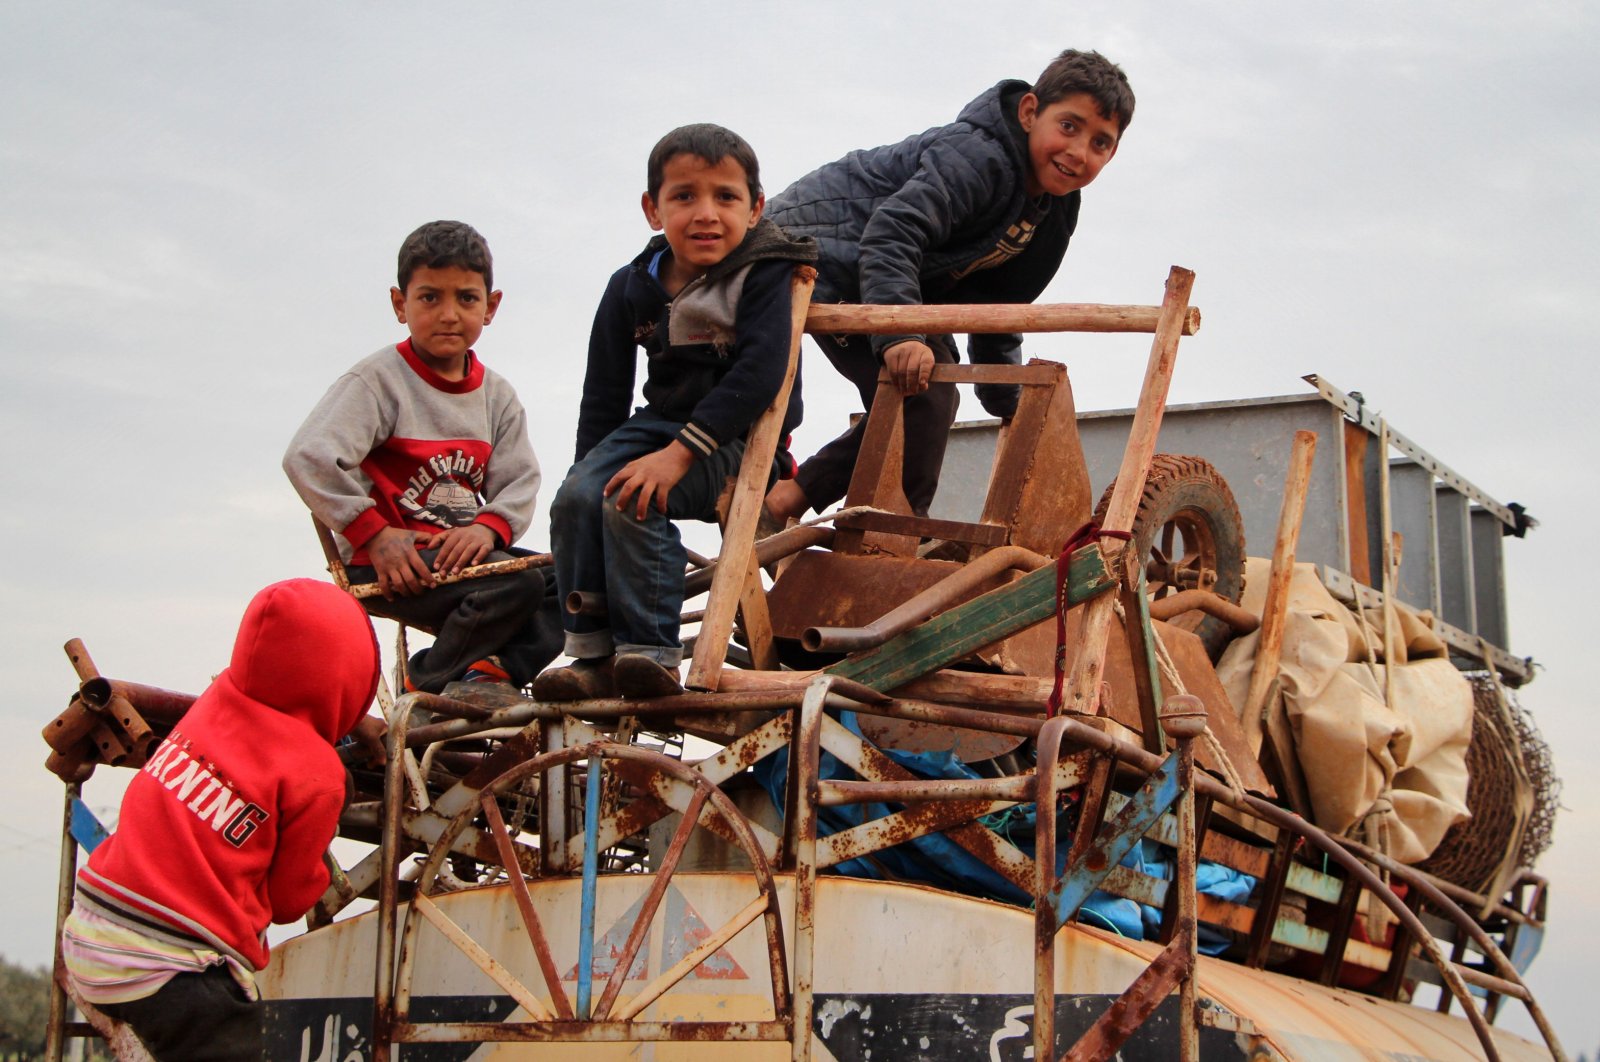 In this file photo taken on Feb. 15, 2020 children ride atop a water truck that is also loaded with furniture in the countryside of the village of Saharah, lying on the western edge of Syria's northern Aleppo province by Idlib province (AFP Photo)